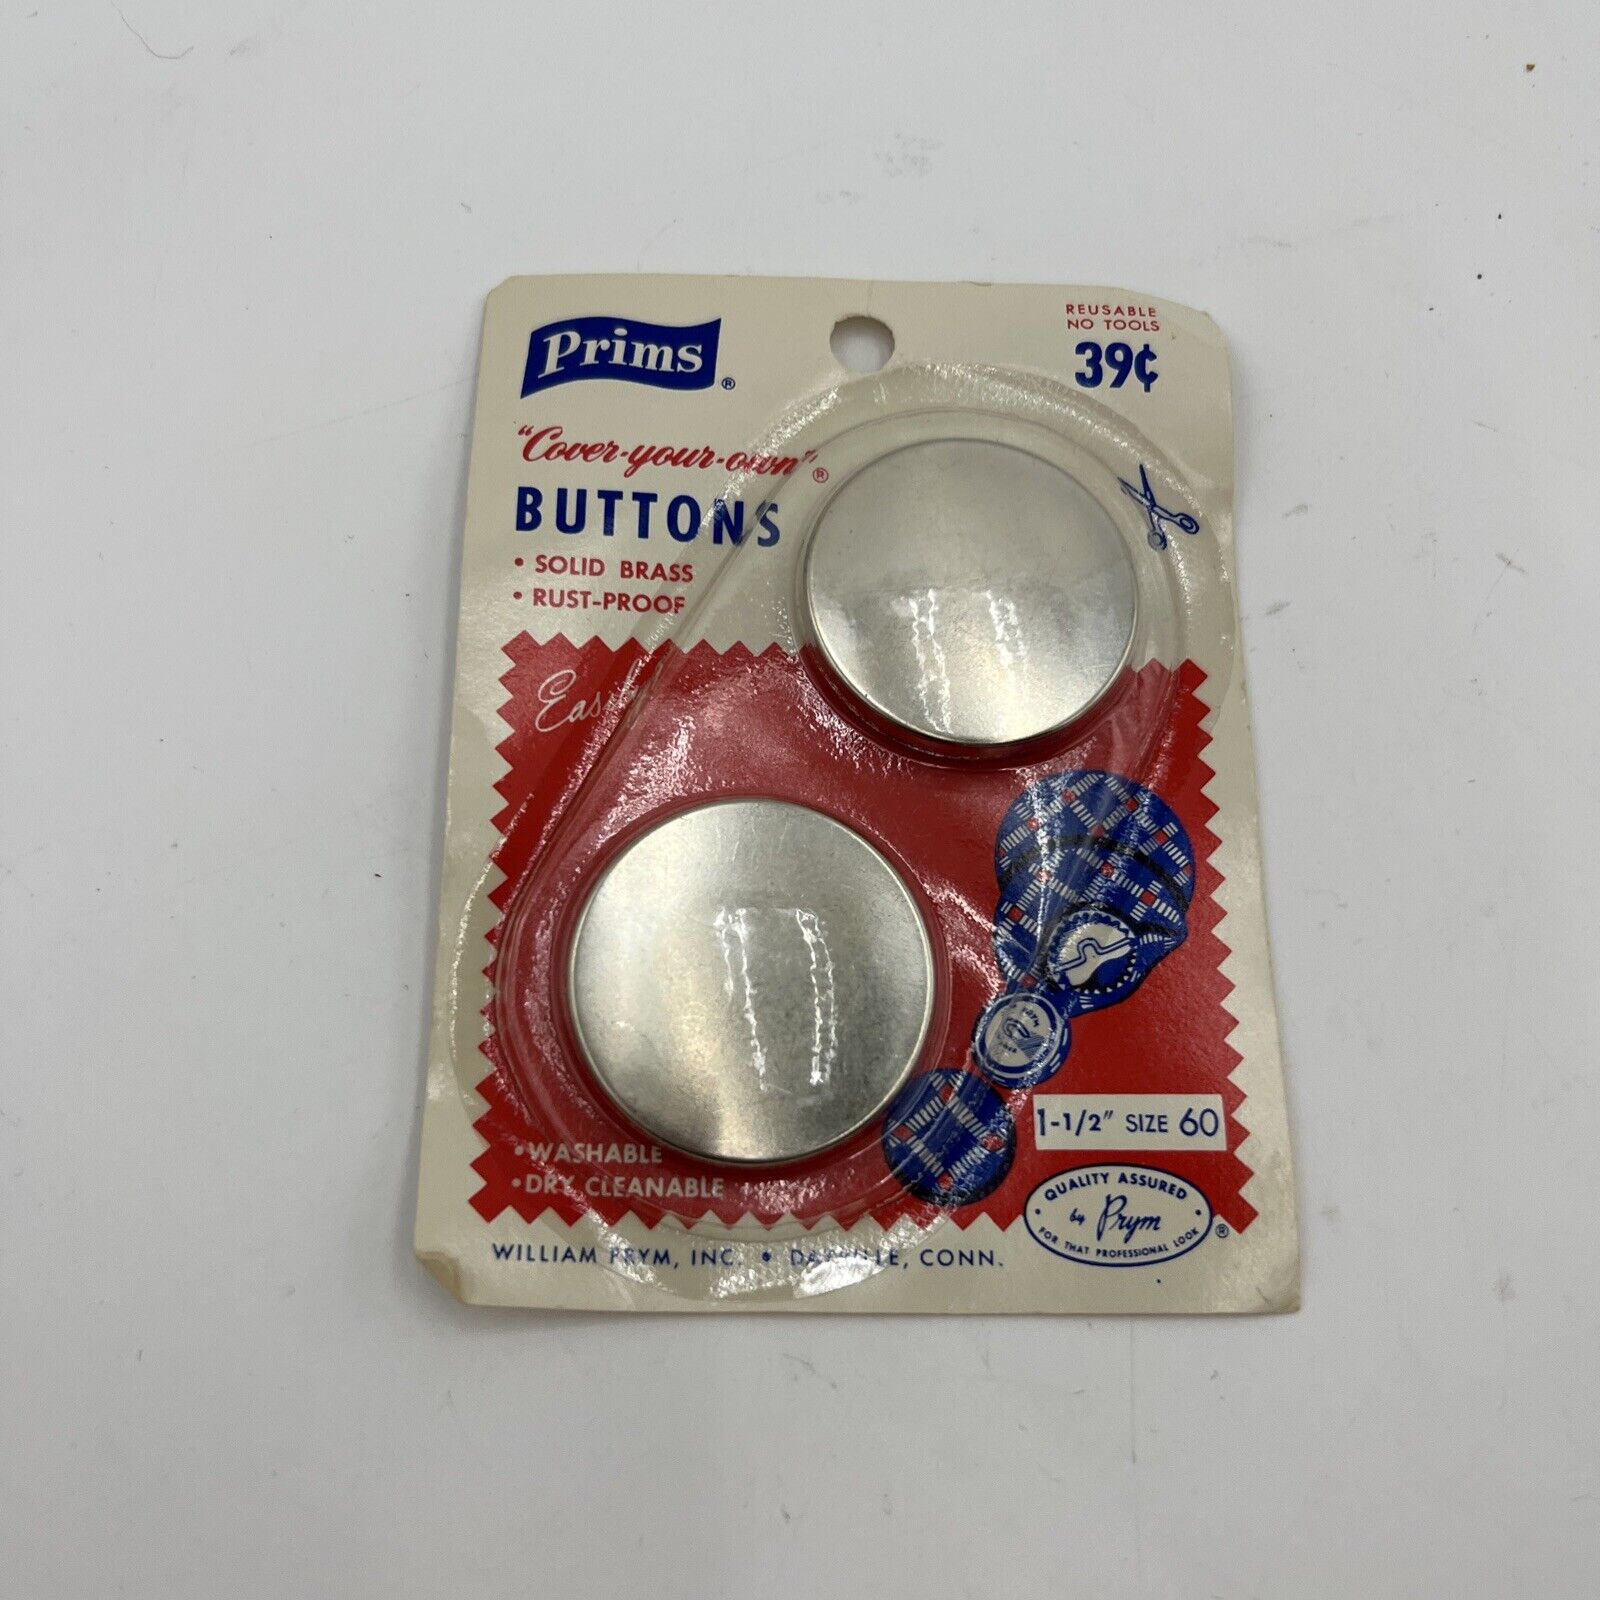 Vintage Prims 2 Ct. COVER YOUR OWN BUTTONS-Solid Brass-Rust-Proof sz 60 1/1.5